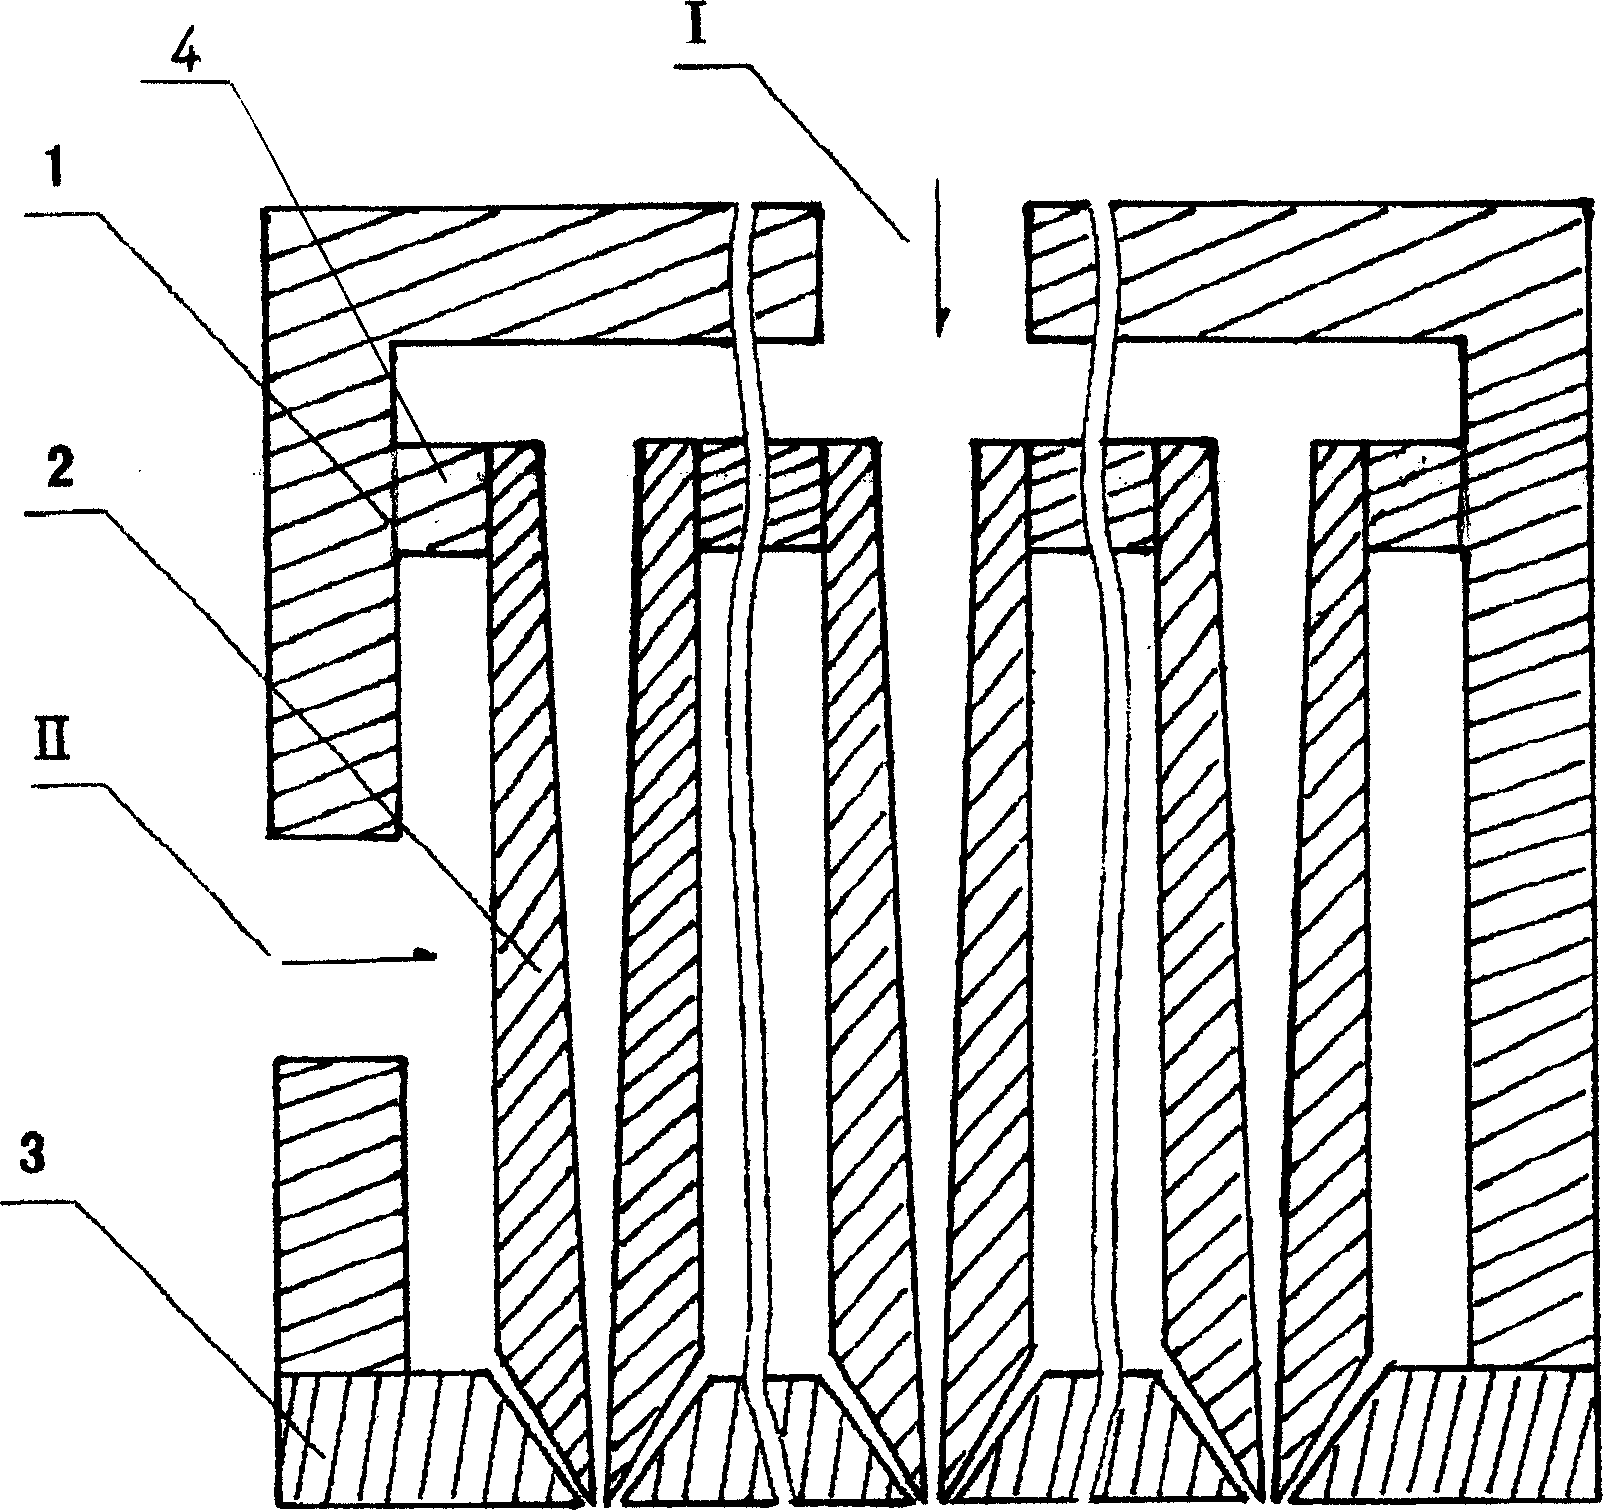 Instant New-year-cake processing method and its extruding-formation apparatus